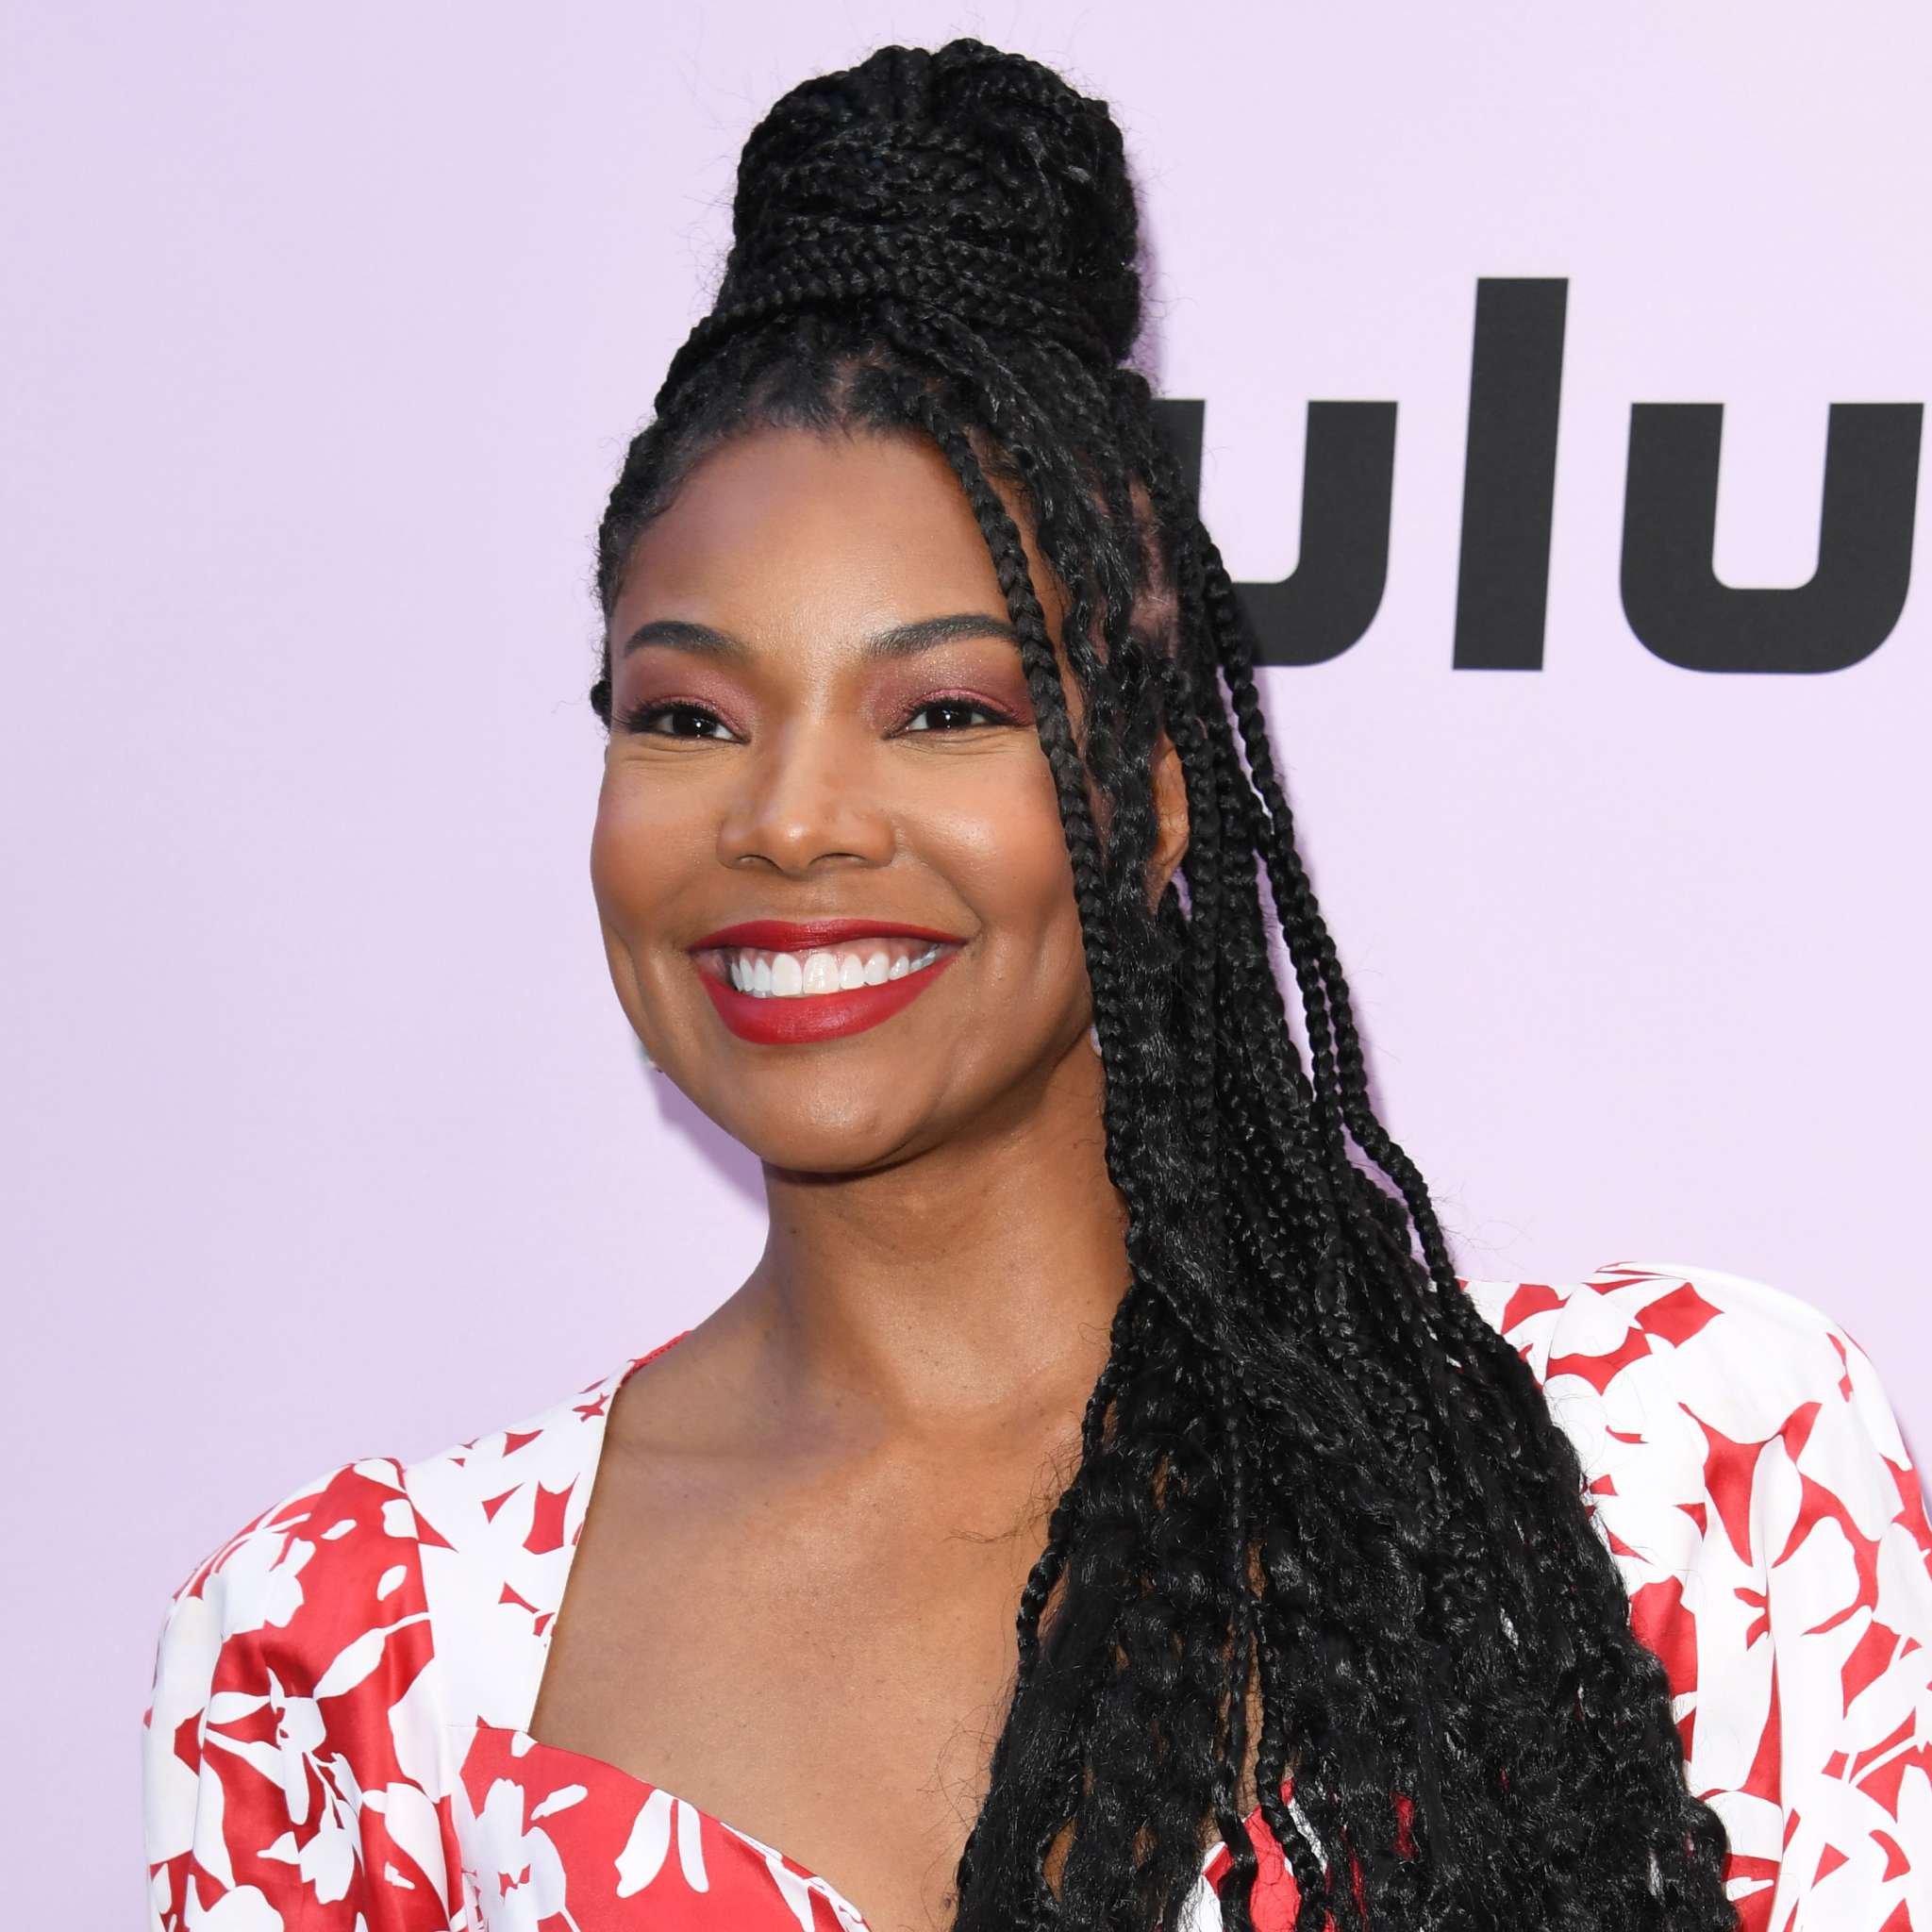 gabrielle-union-praises-audra-mcdonald-and-fans-are-in-tears